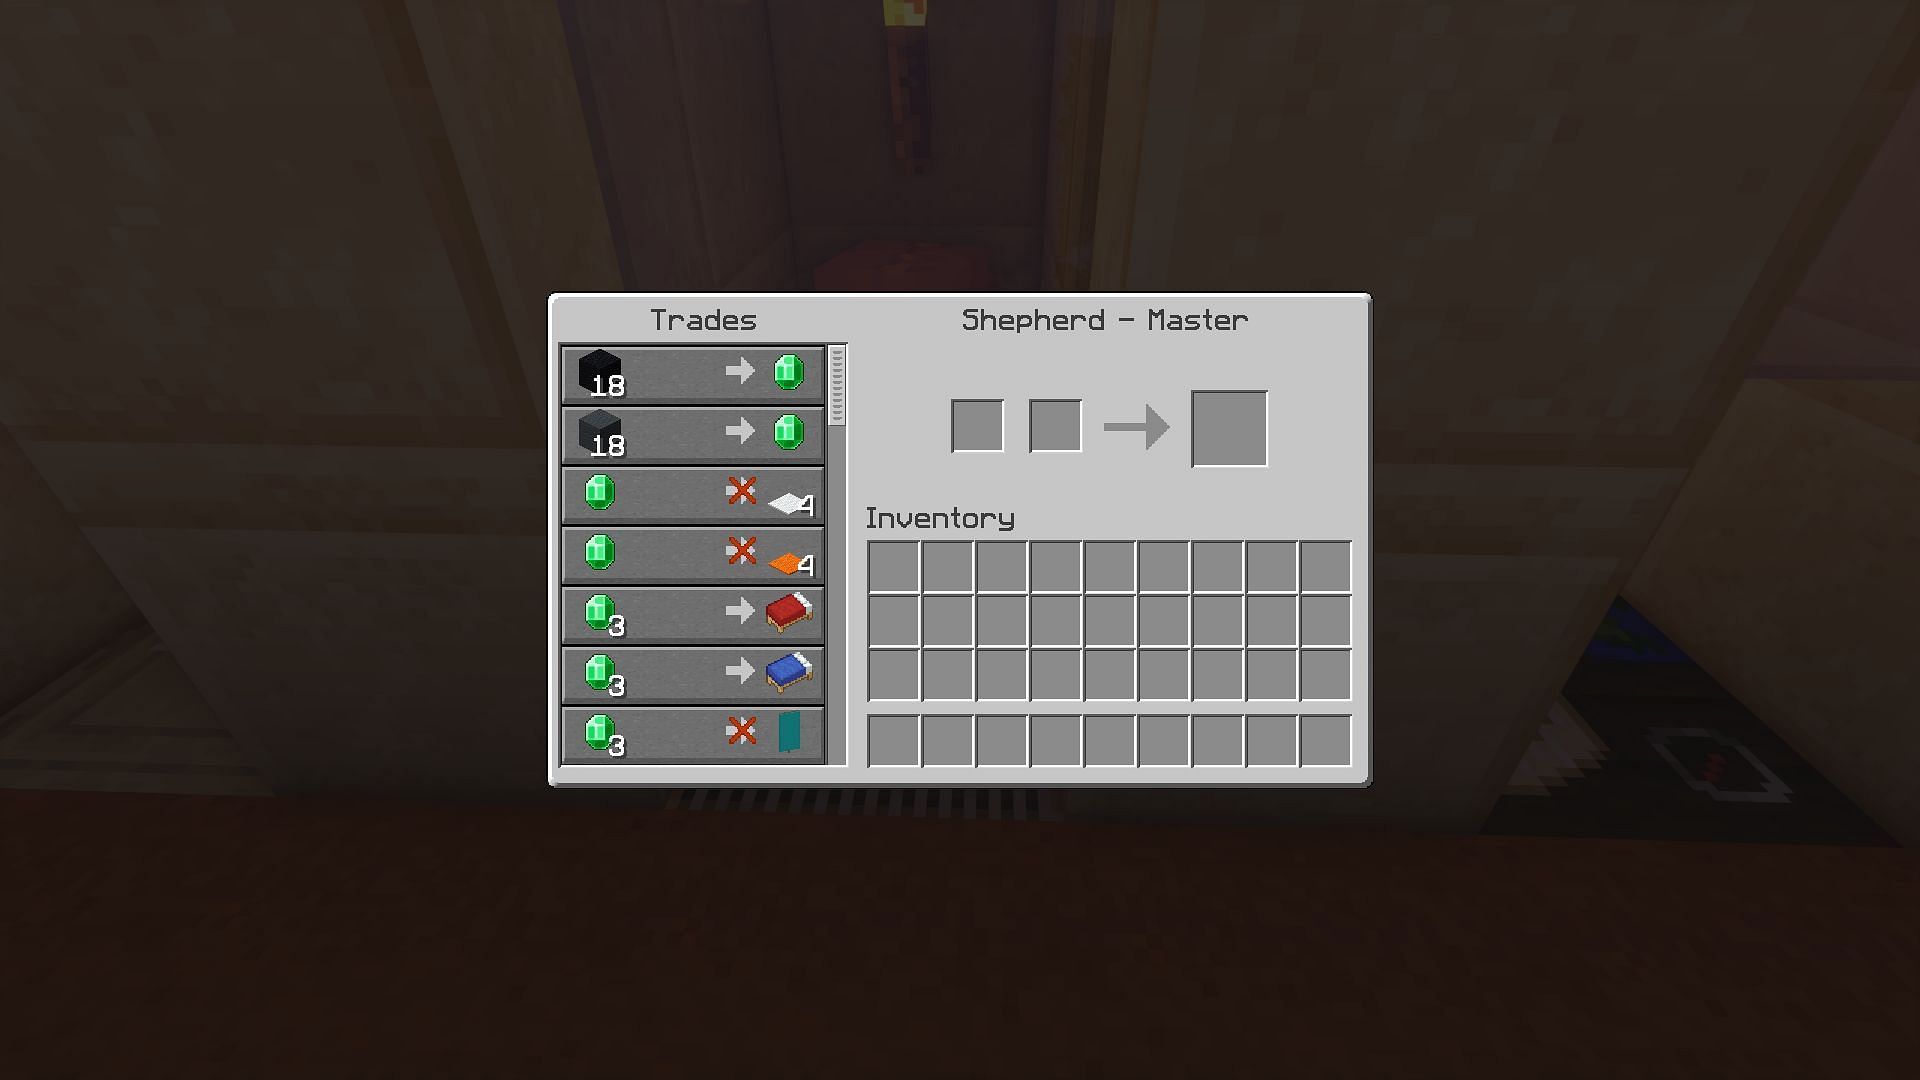 The trades offered by a shepherd (Image via Minecraft)